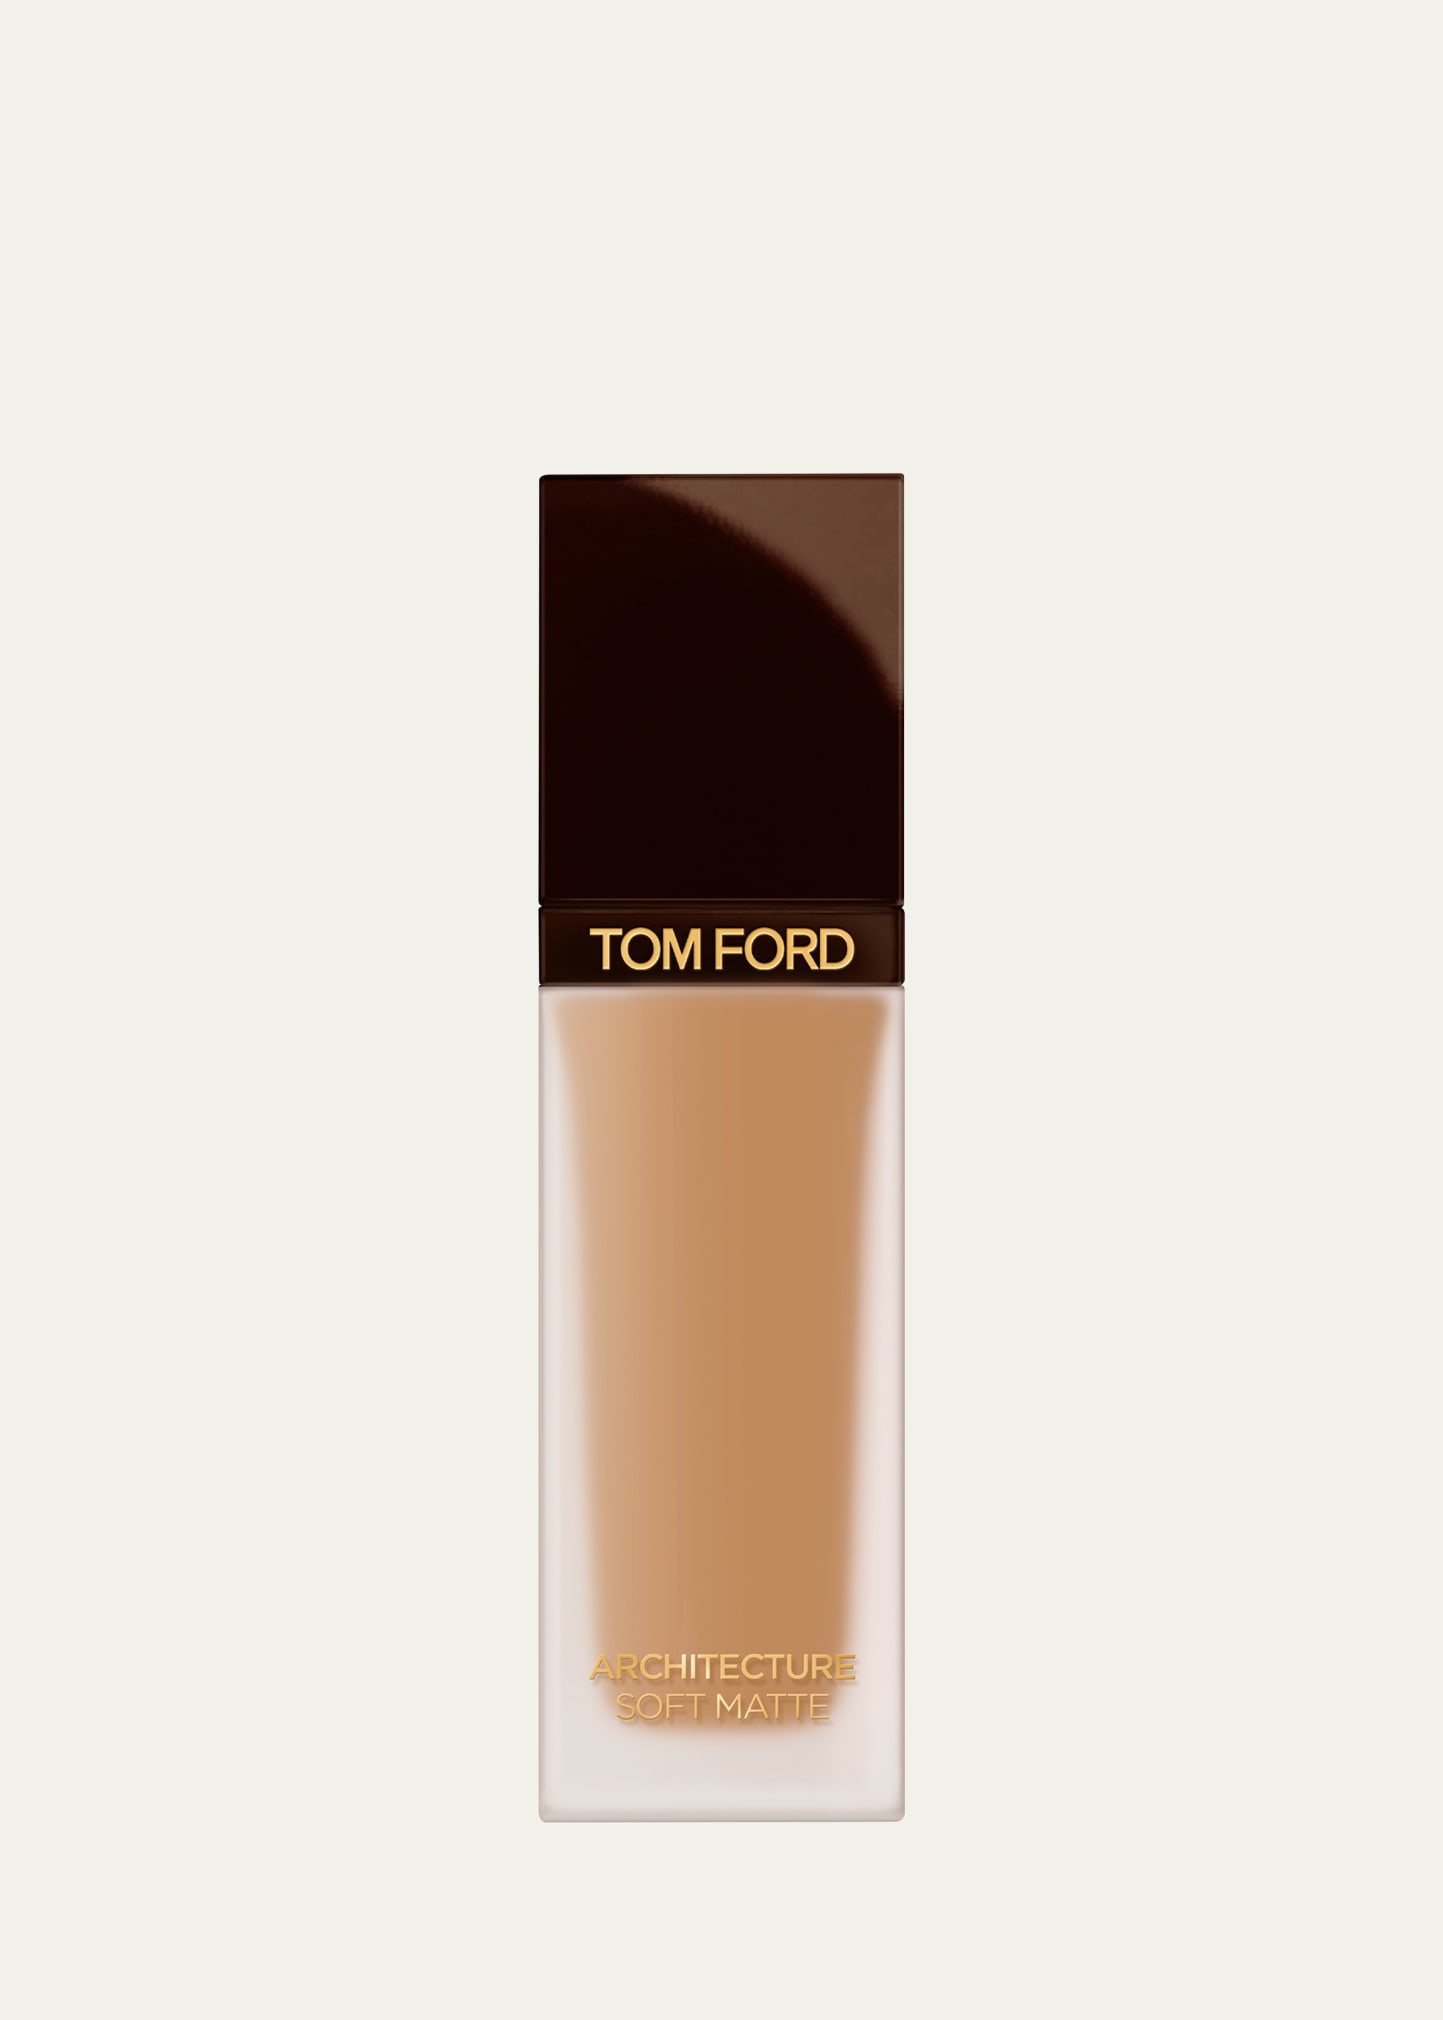 Tom Ford Architecture Soft Matte Foundation In Asm - 7.2 Sepia